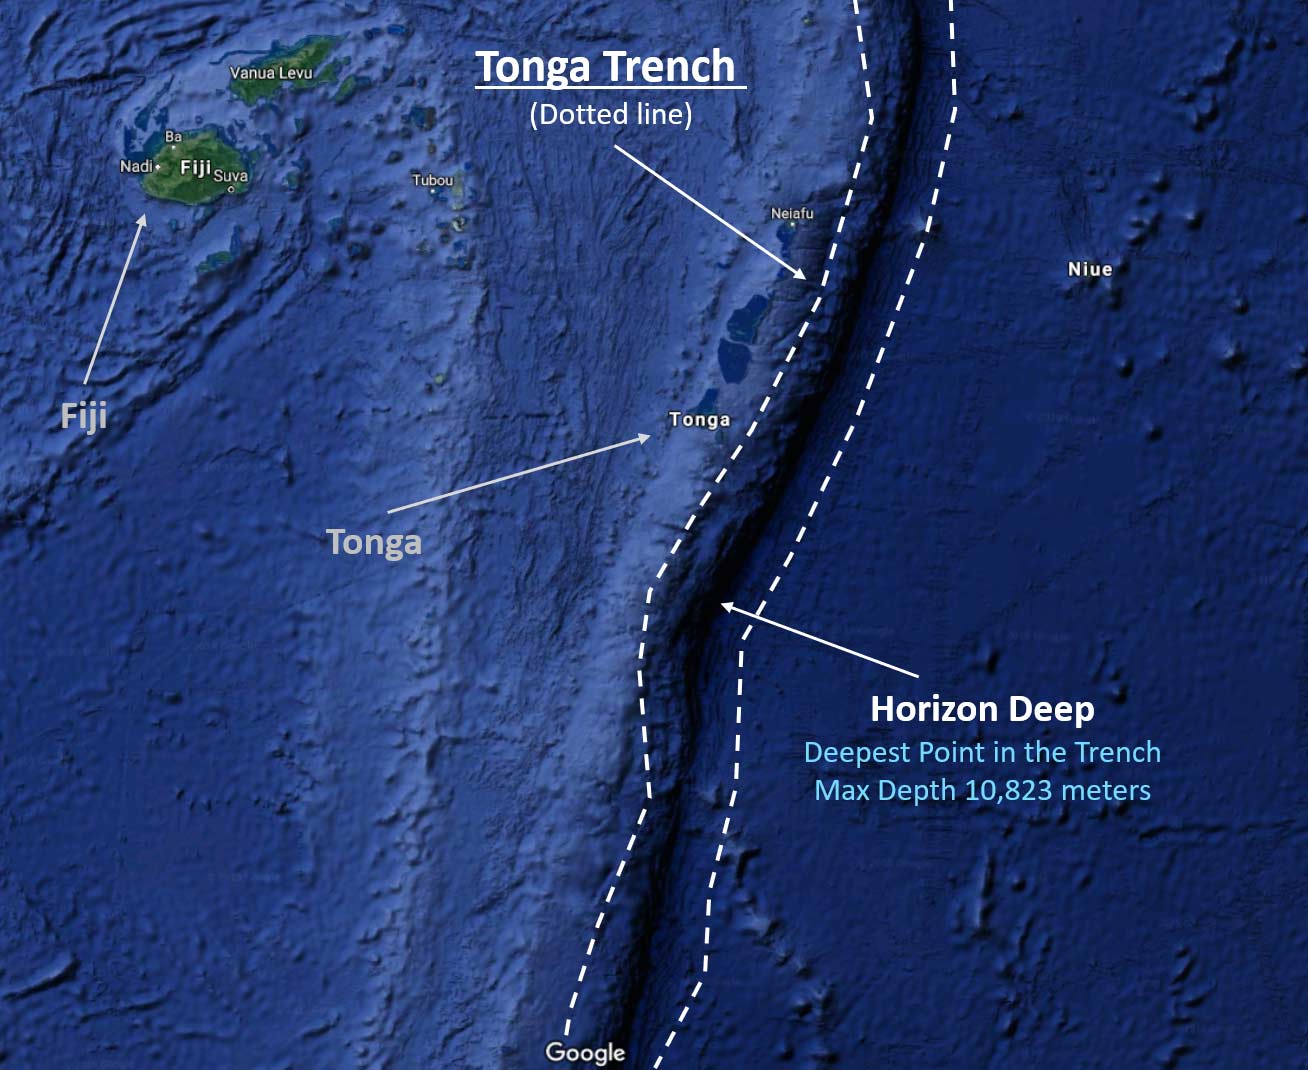 Five Deeps Expedition - Deepest point in Tonga Trench map 2019